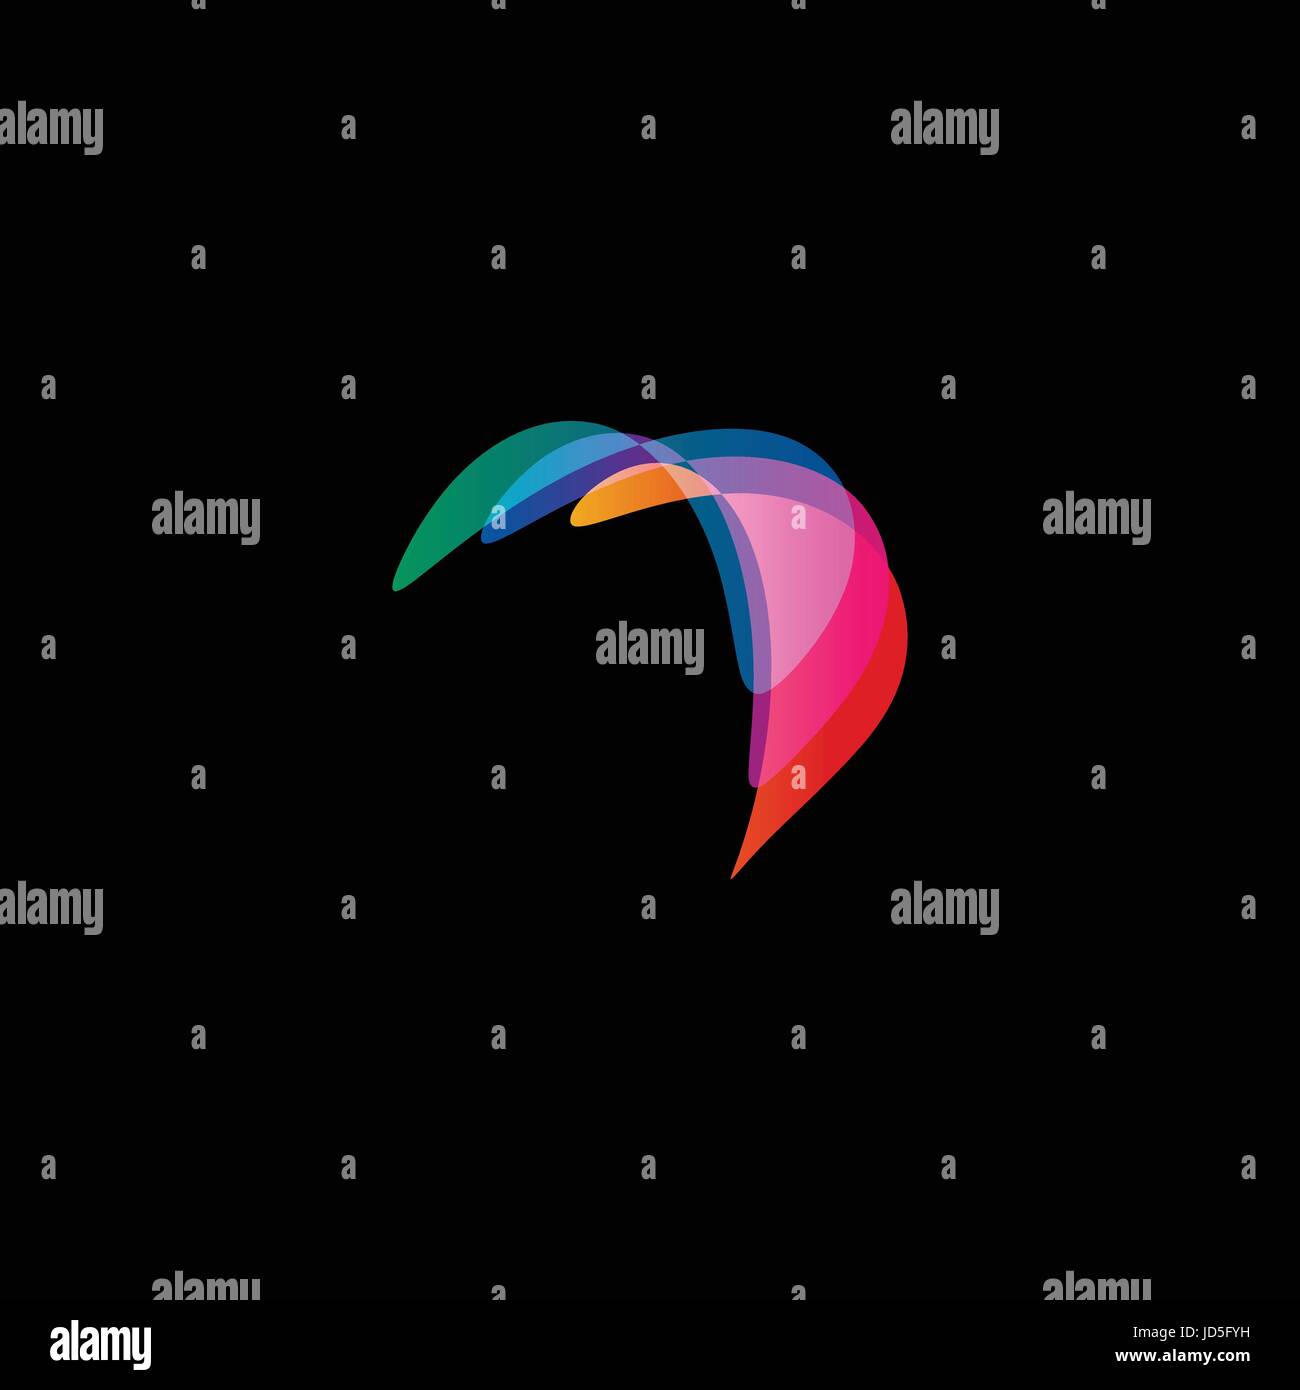 Wavy abstract vector logo. Smooth gradients and colorful cosmic and high technology oval shapes Stock Vector